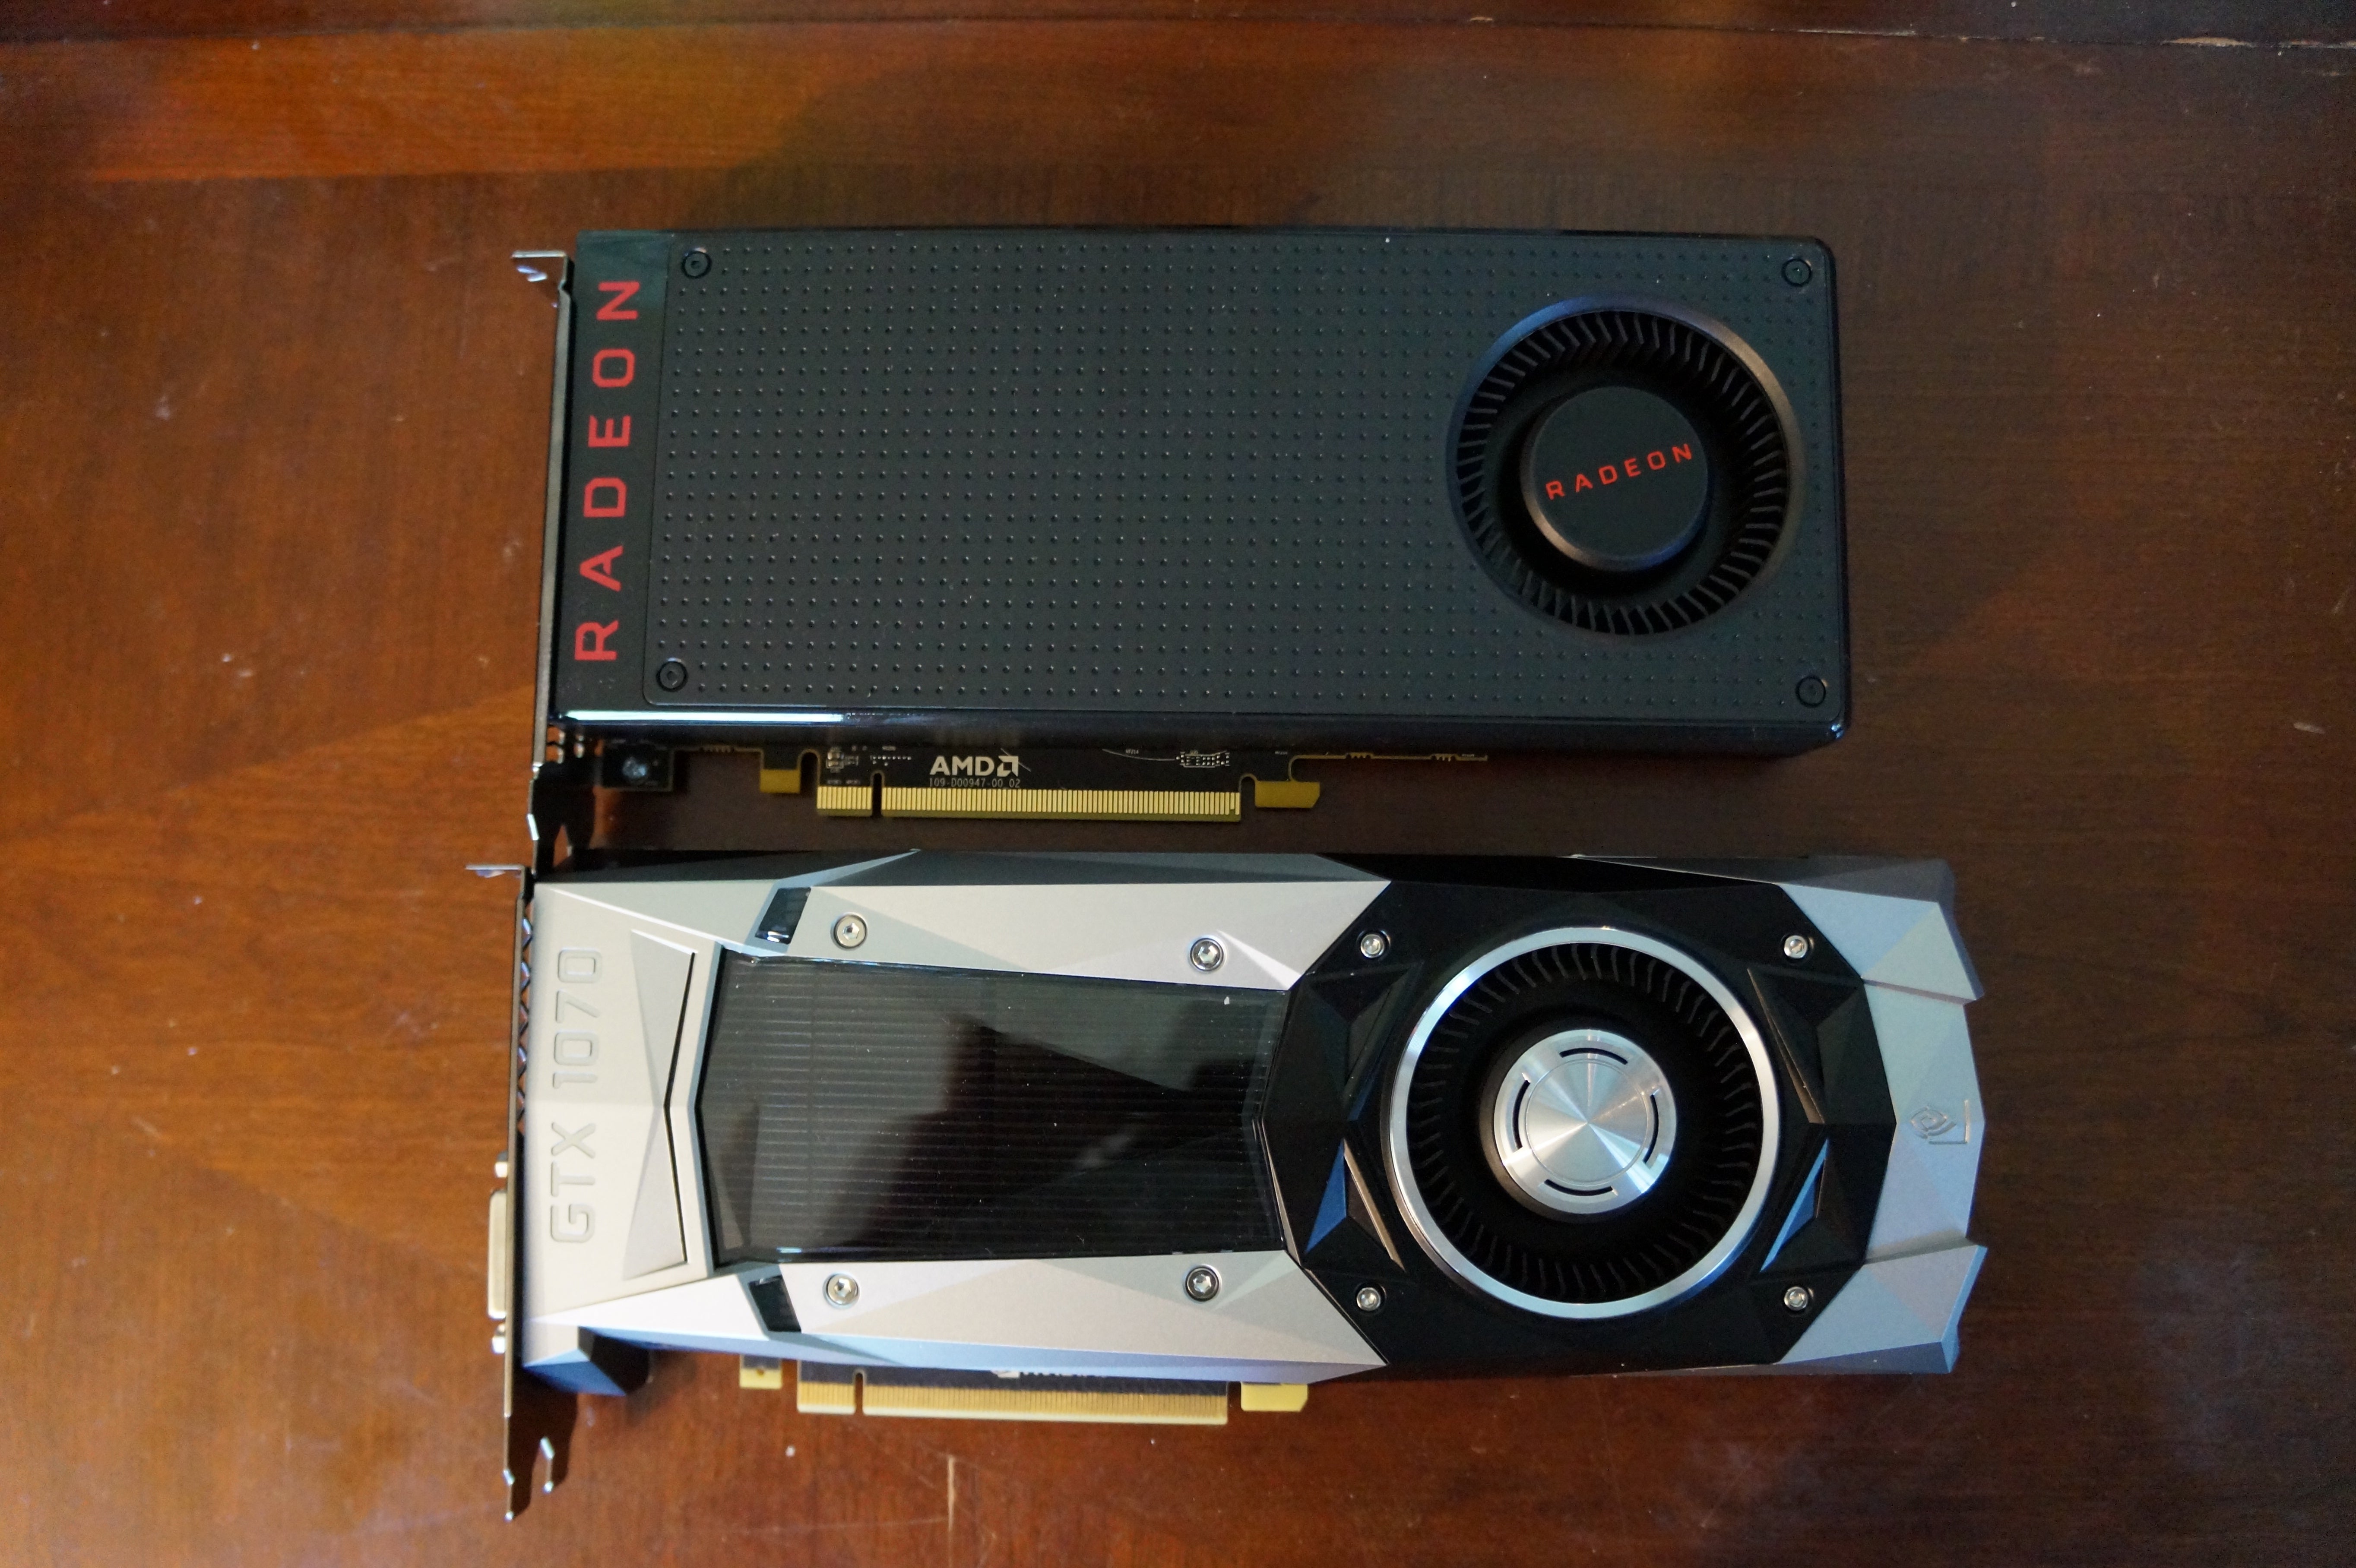 http://images.techhive.com/images/article/2016/06/radeon-rx-480-10-100667939-orig.jpg